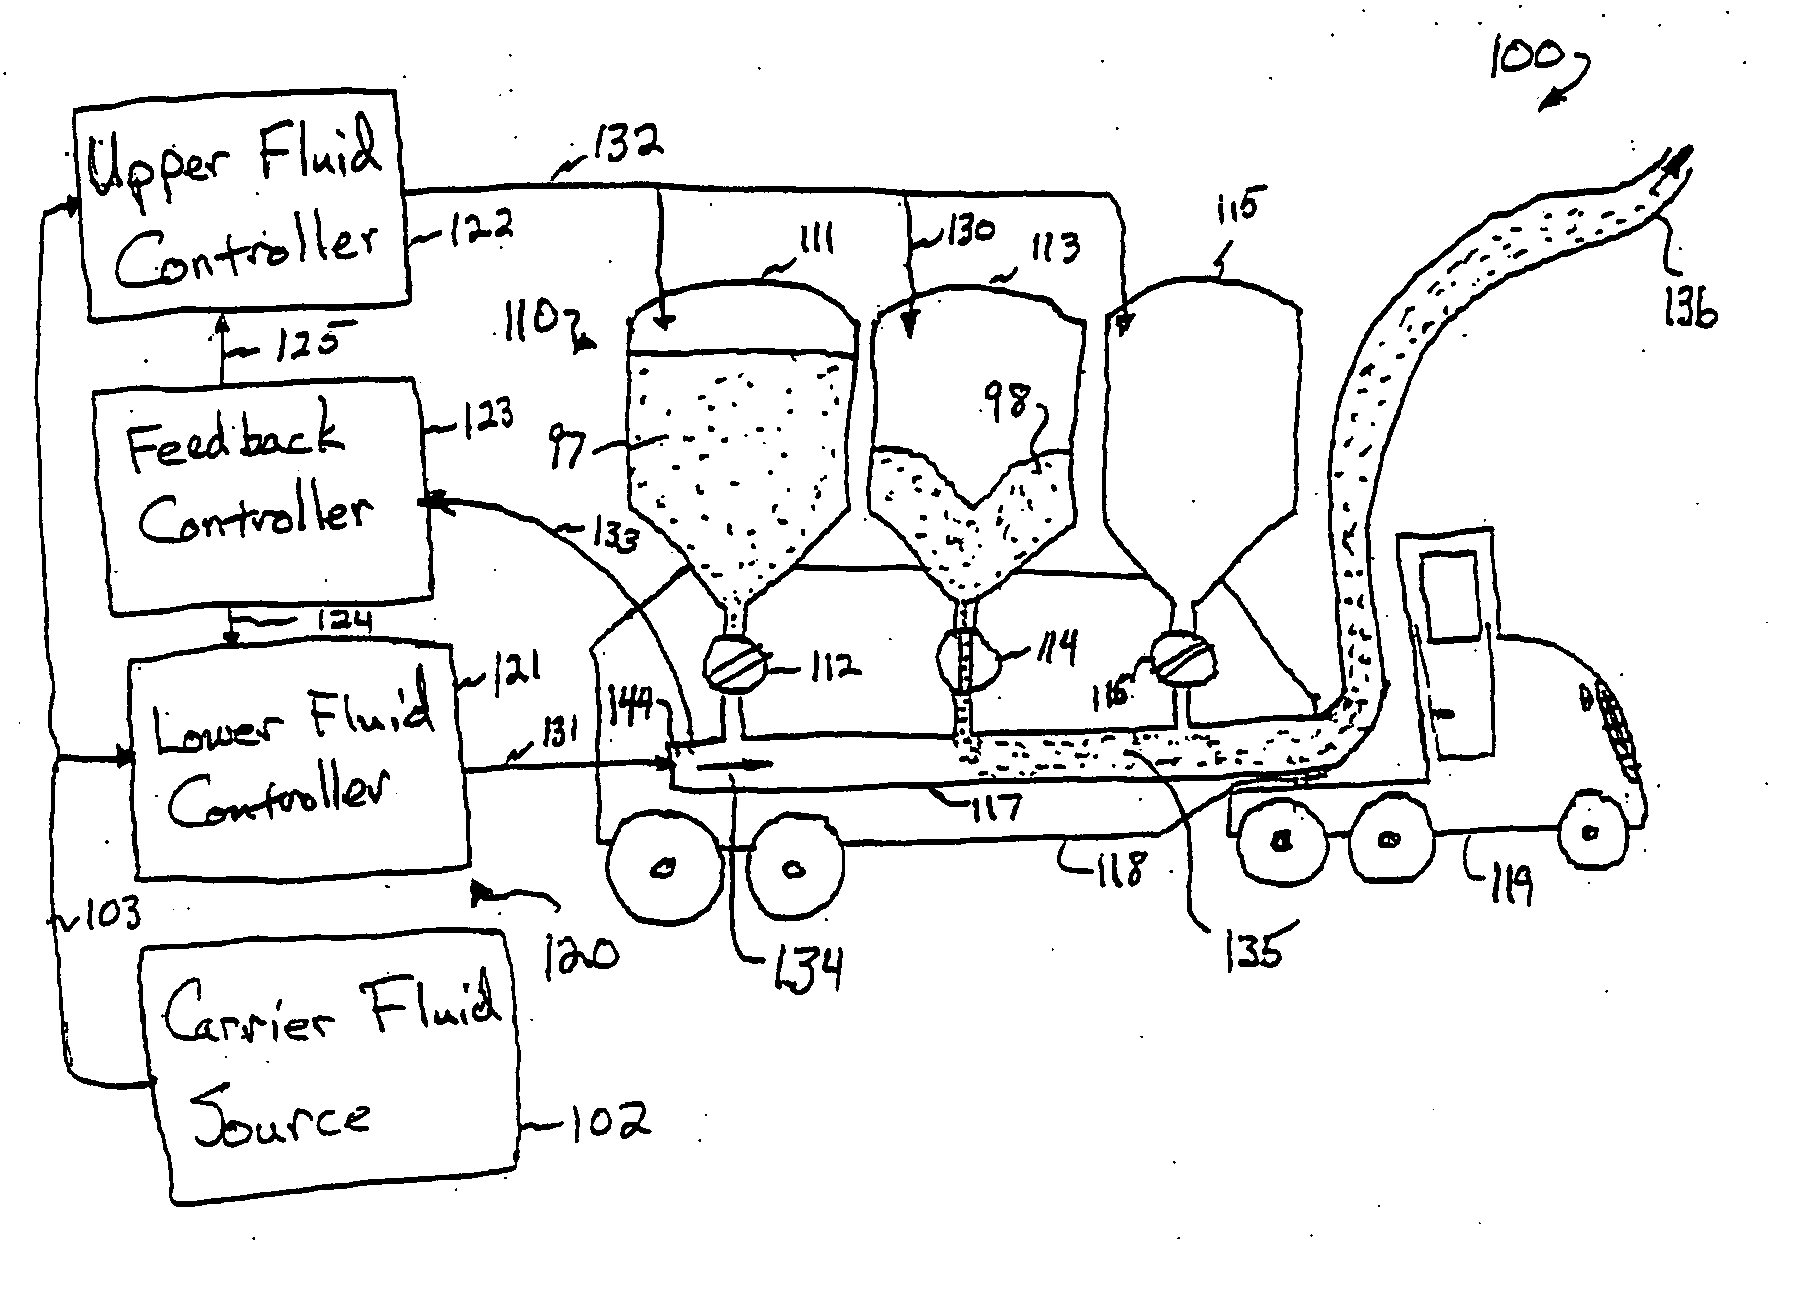 Apparatus and method for controlling fluid flows for pneumatic conveying